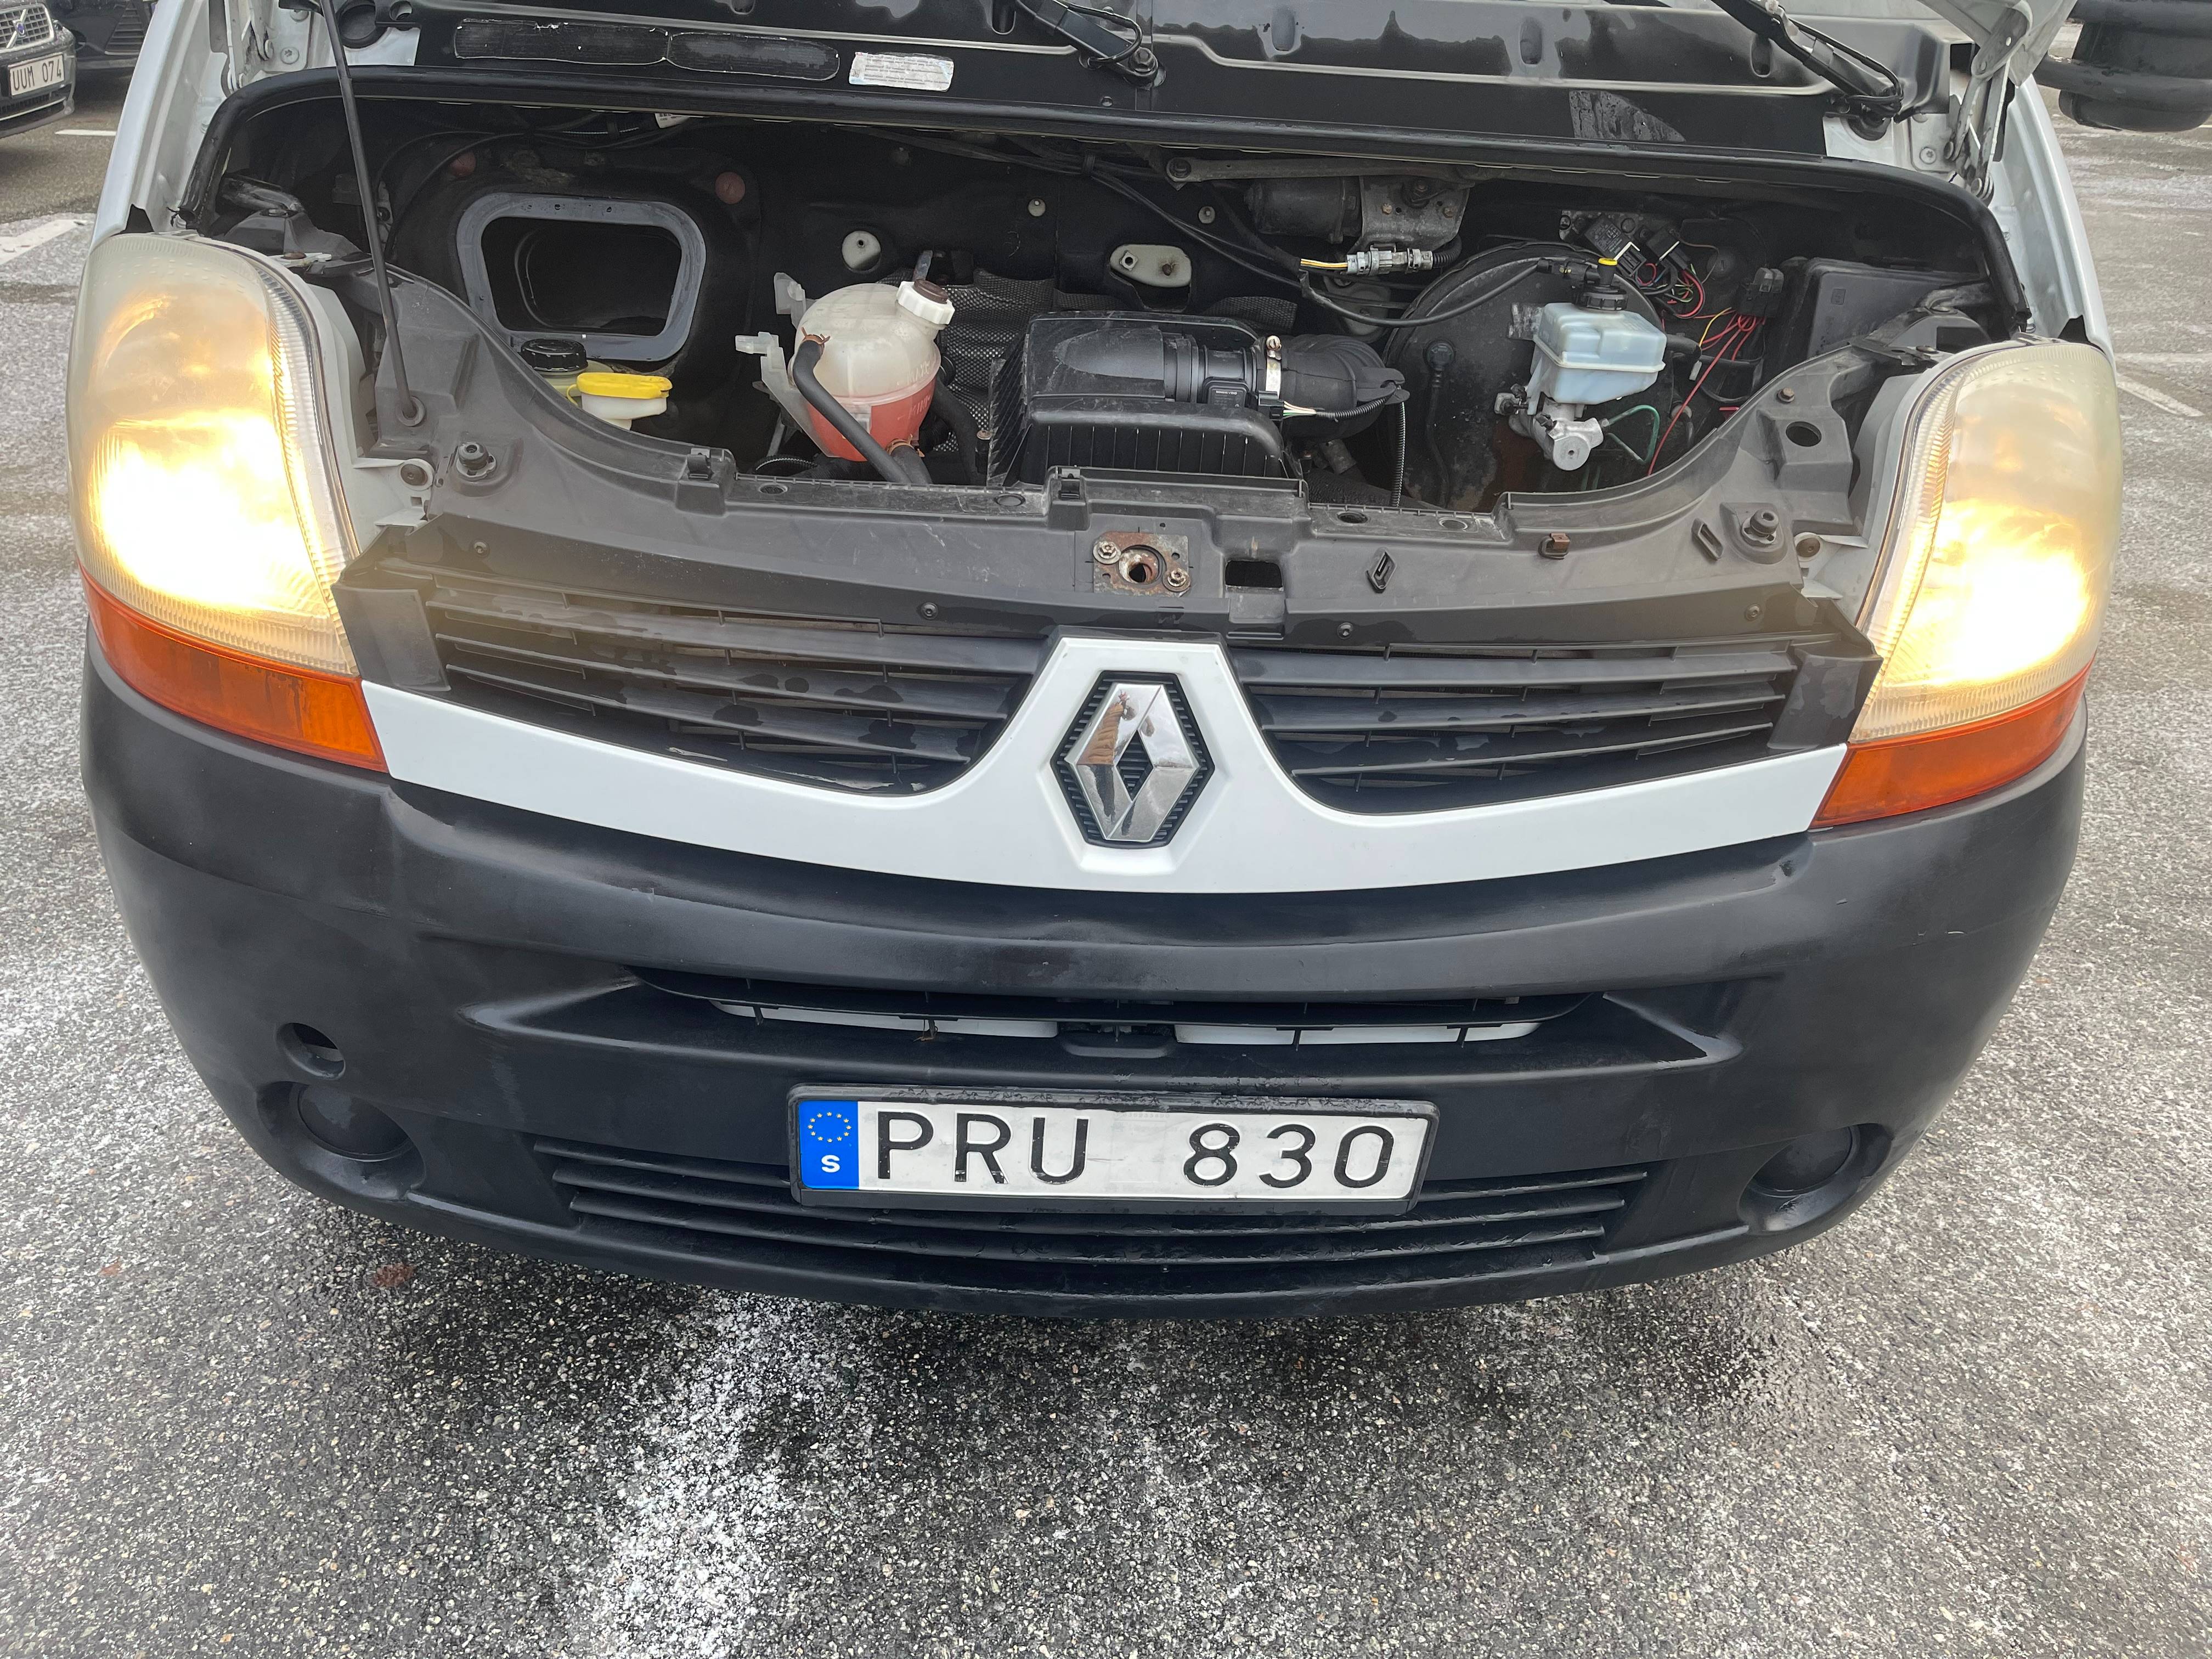 Renault master Chassi Cab 3.5 T 2.5 dCi